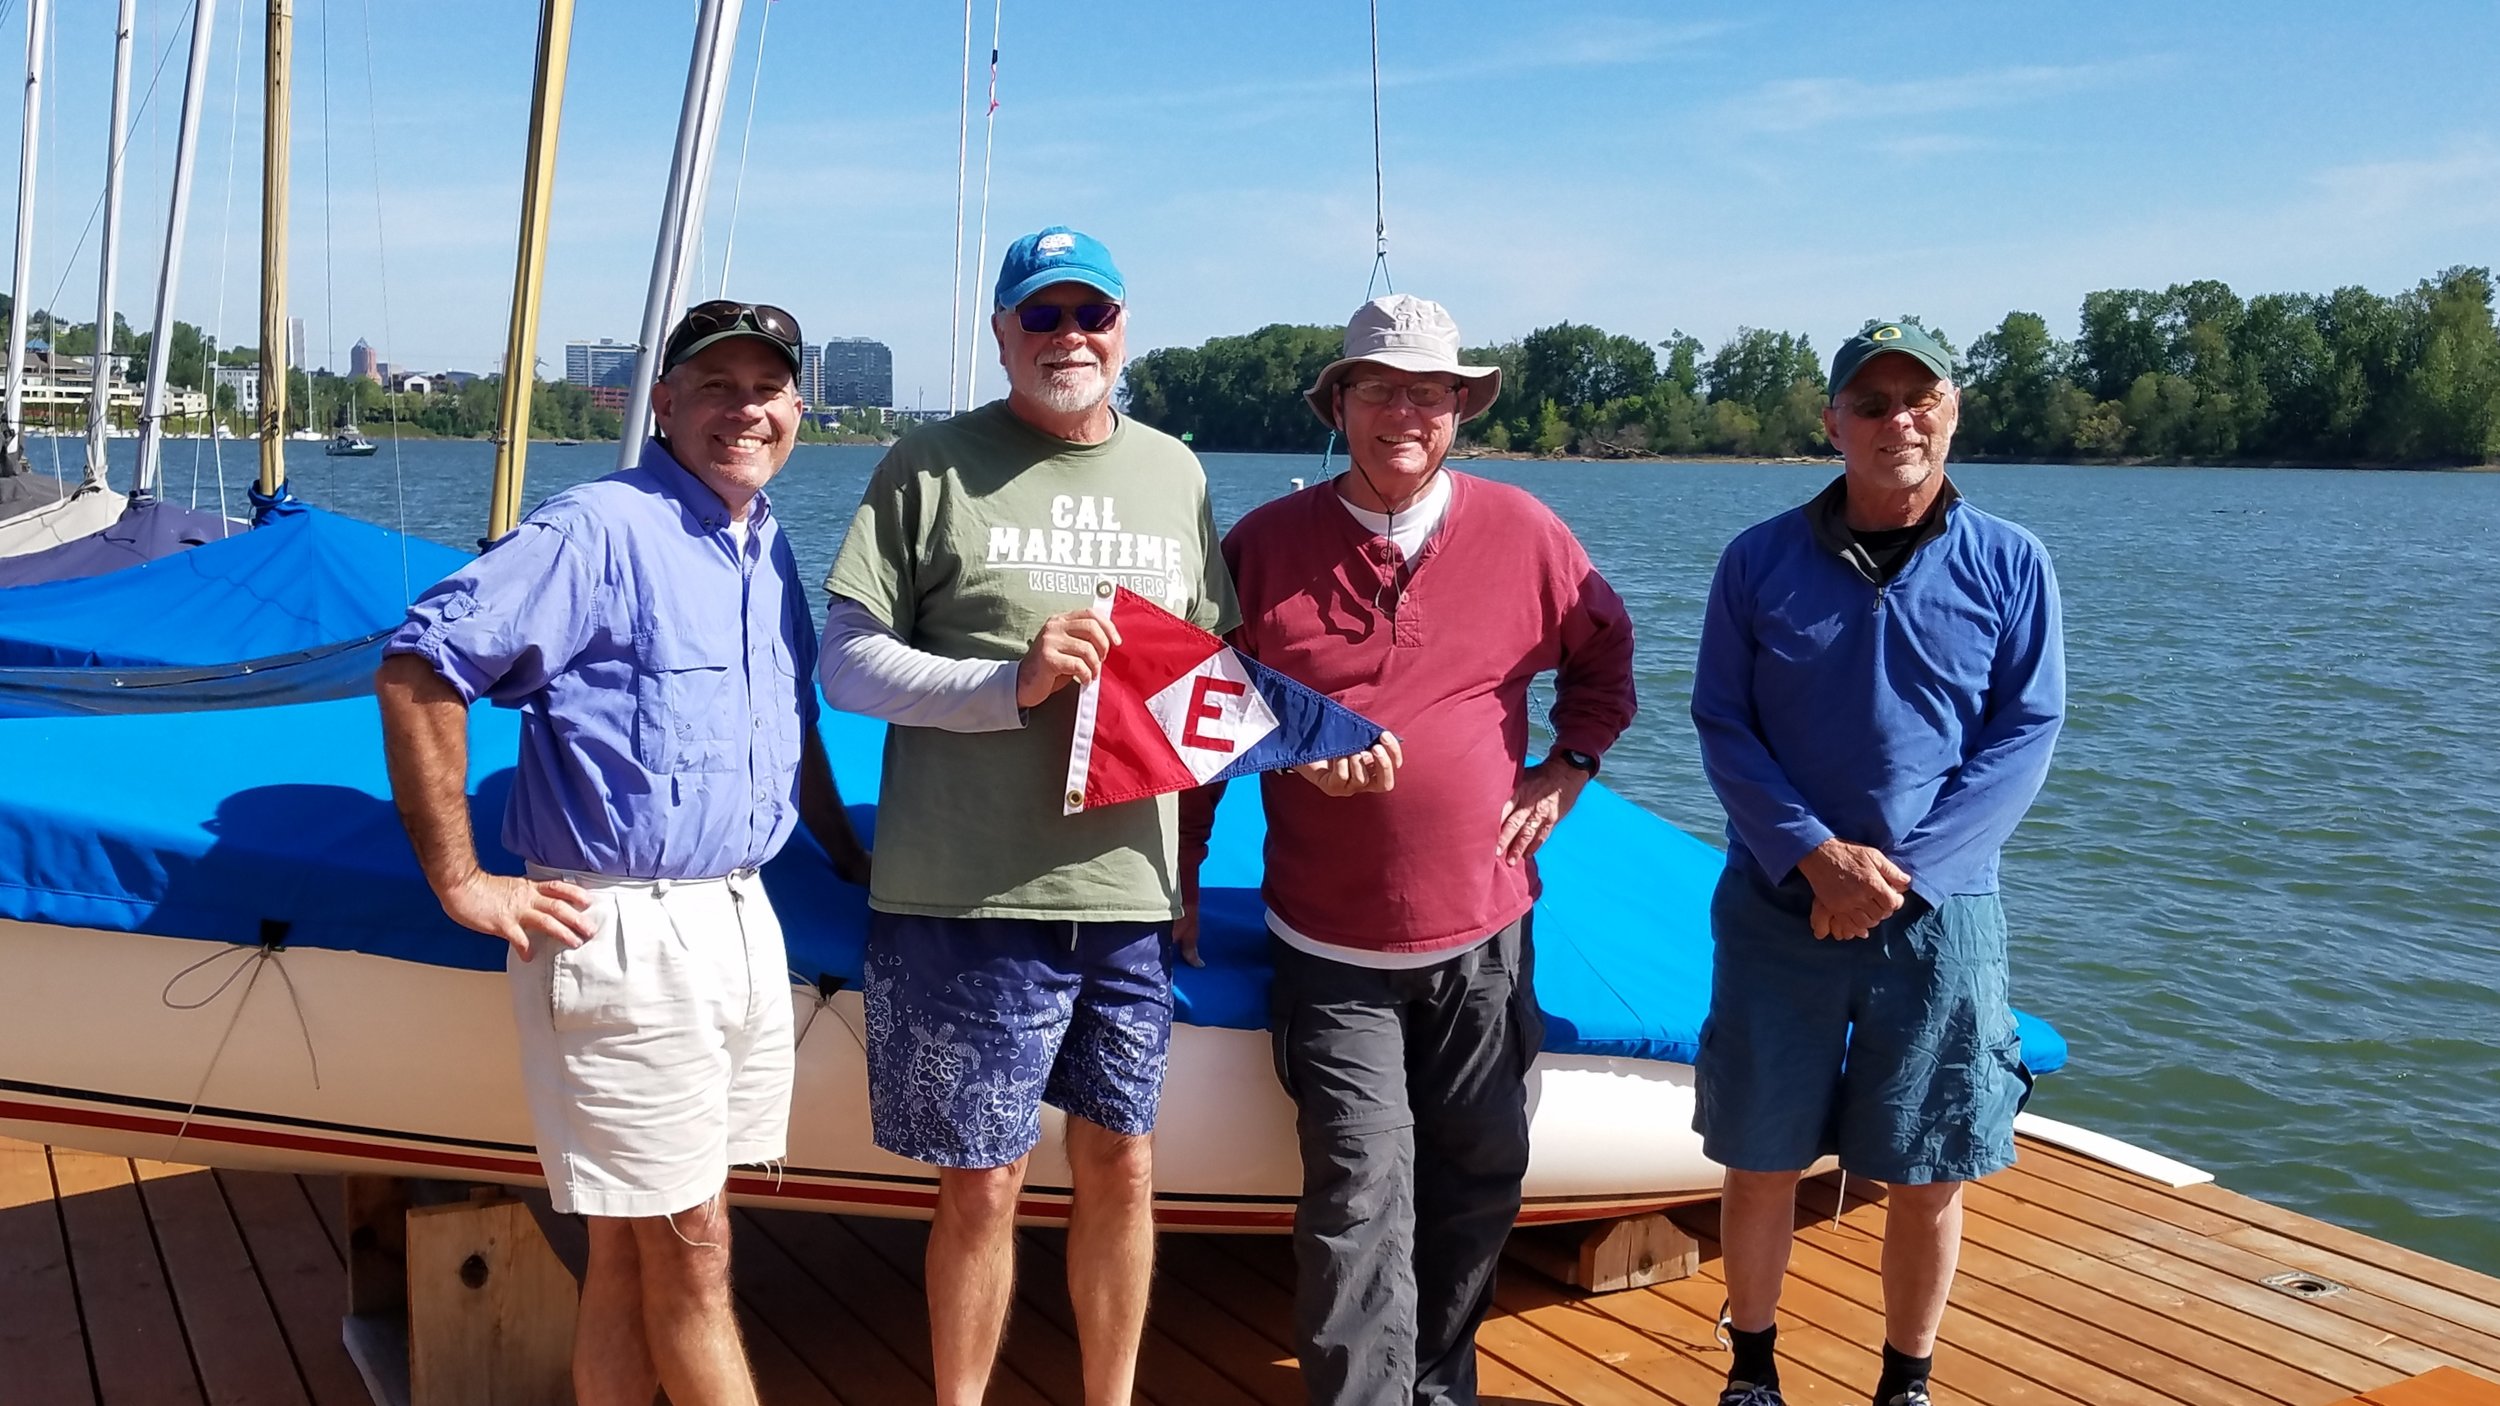  Al, Murray, Allan and brother Jim brought EYC pride to the Turtle Regatta at Willamette Sailing Club in Portland, OR 